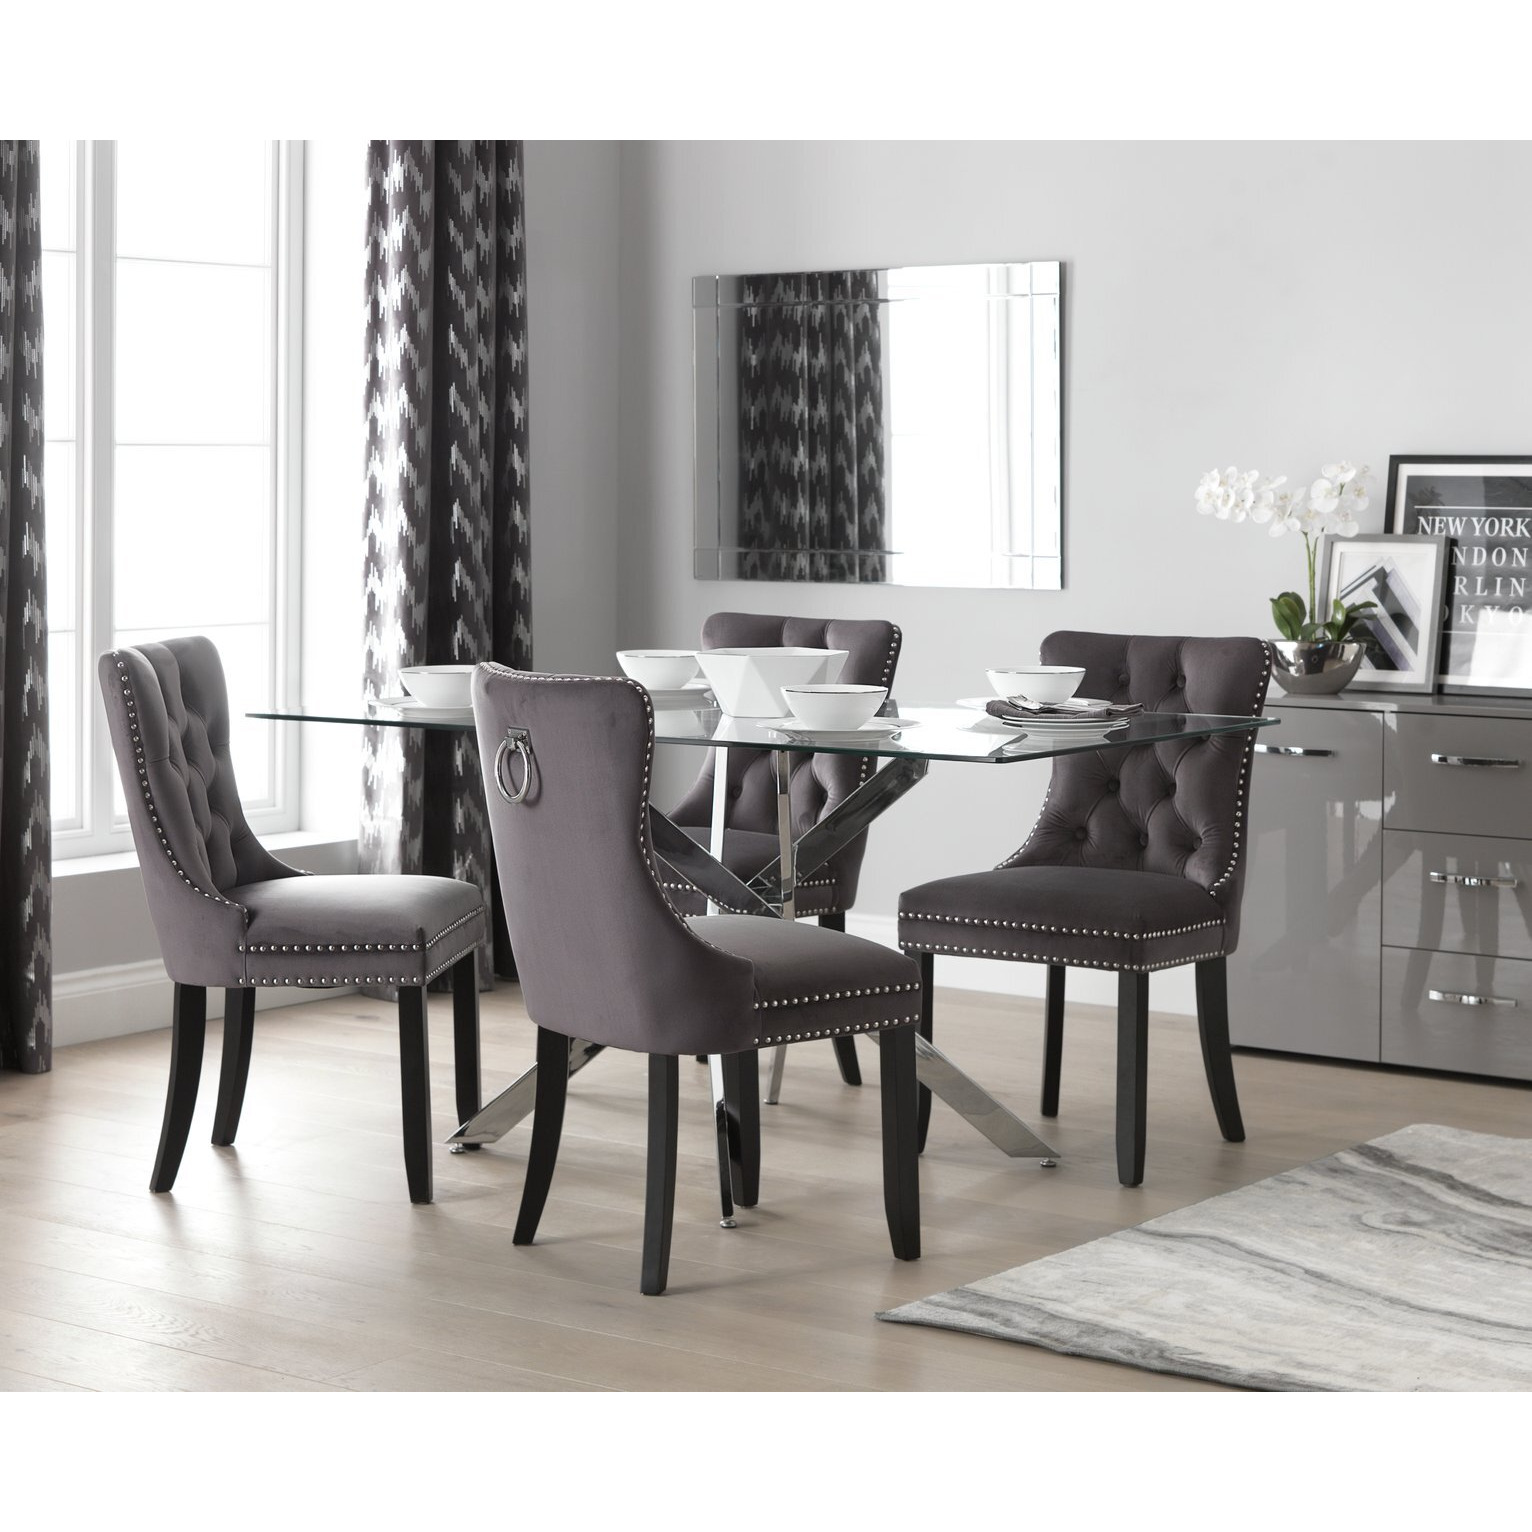 Argos Home Blake Dining Table & 4 Princess Chairs - Charcoal - image 1